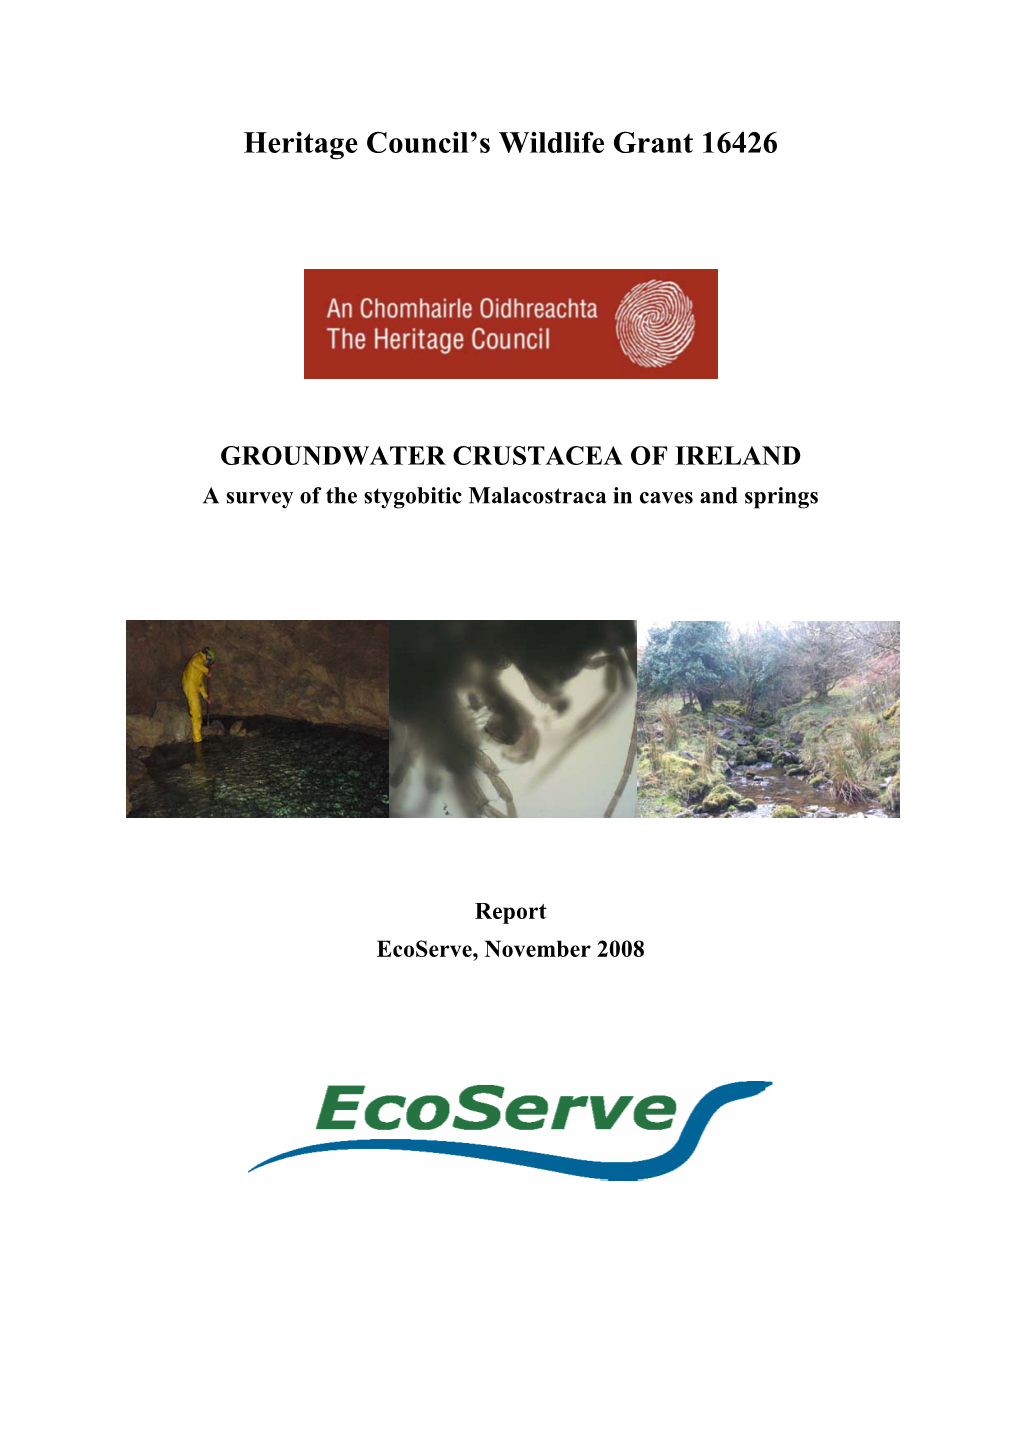 A Survey of the Groundwater Macro-Crustacea Of